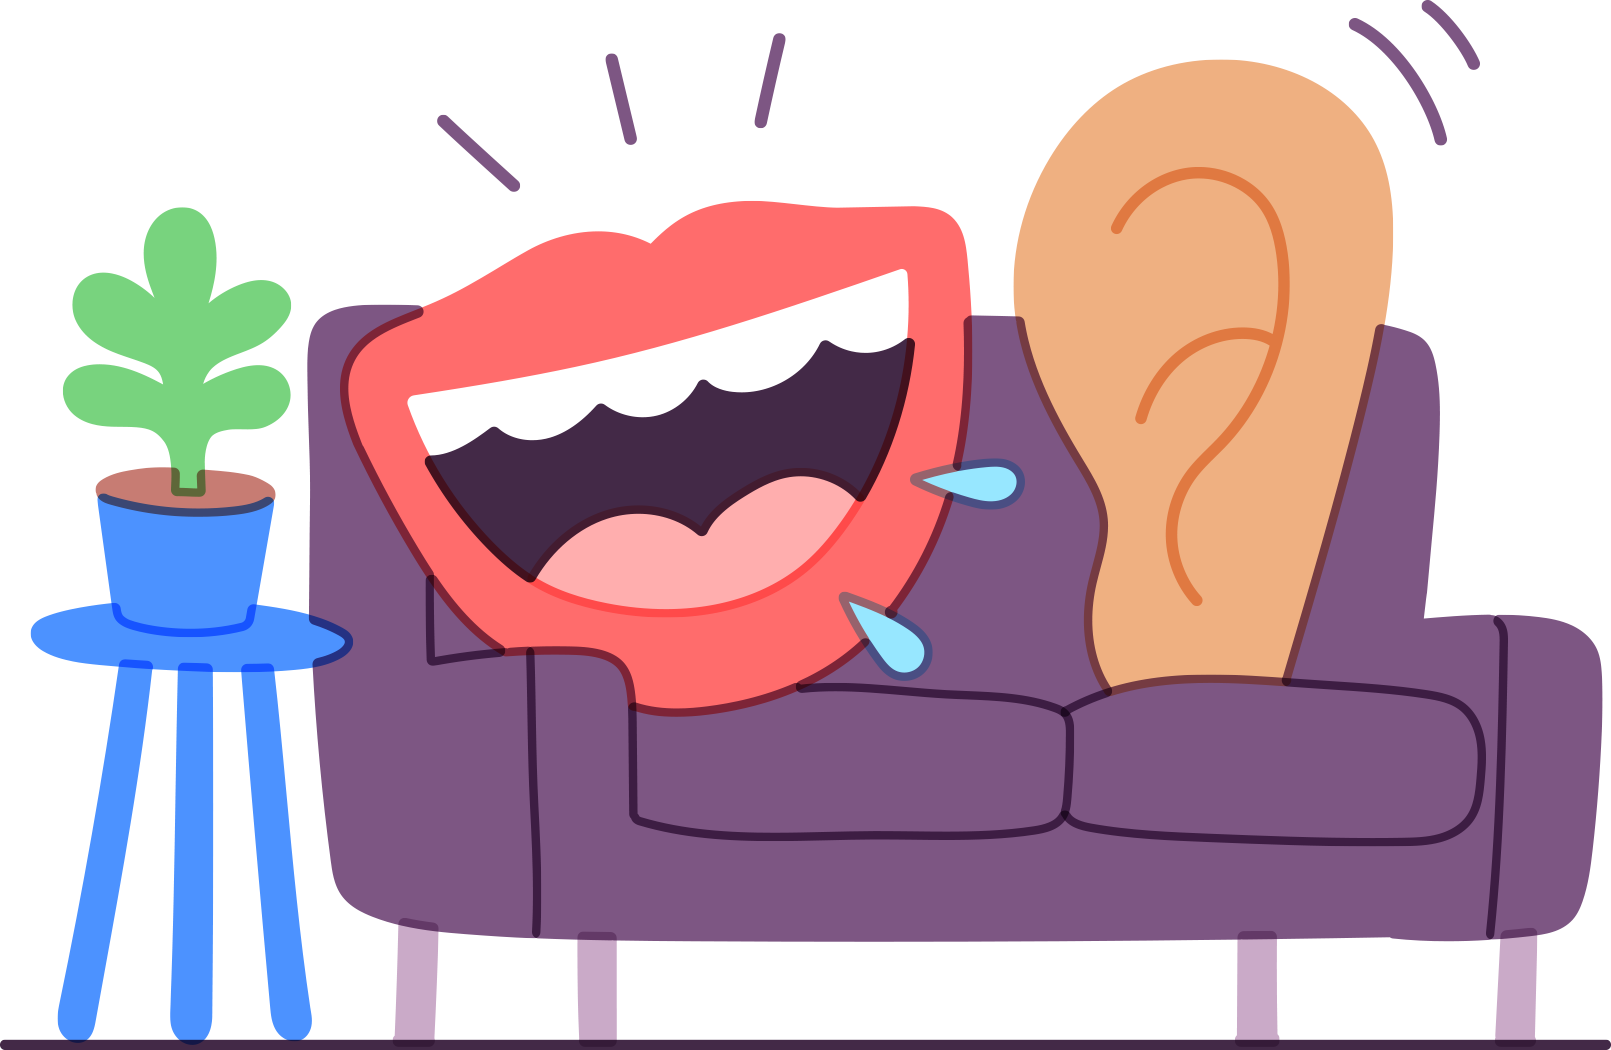 an open cartoonish mouth speaks to a listening ear on a plush therapist couch